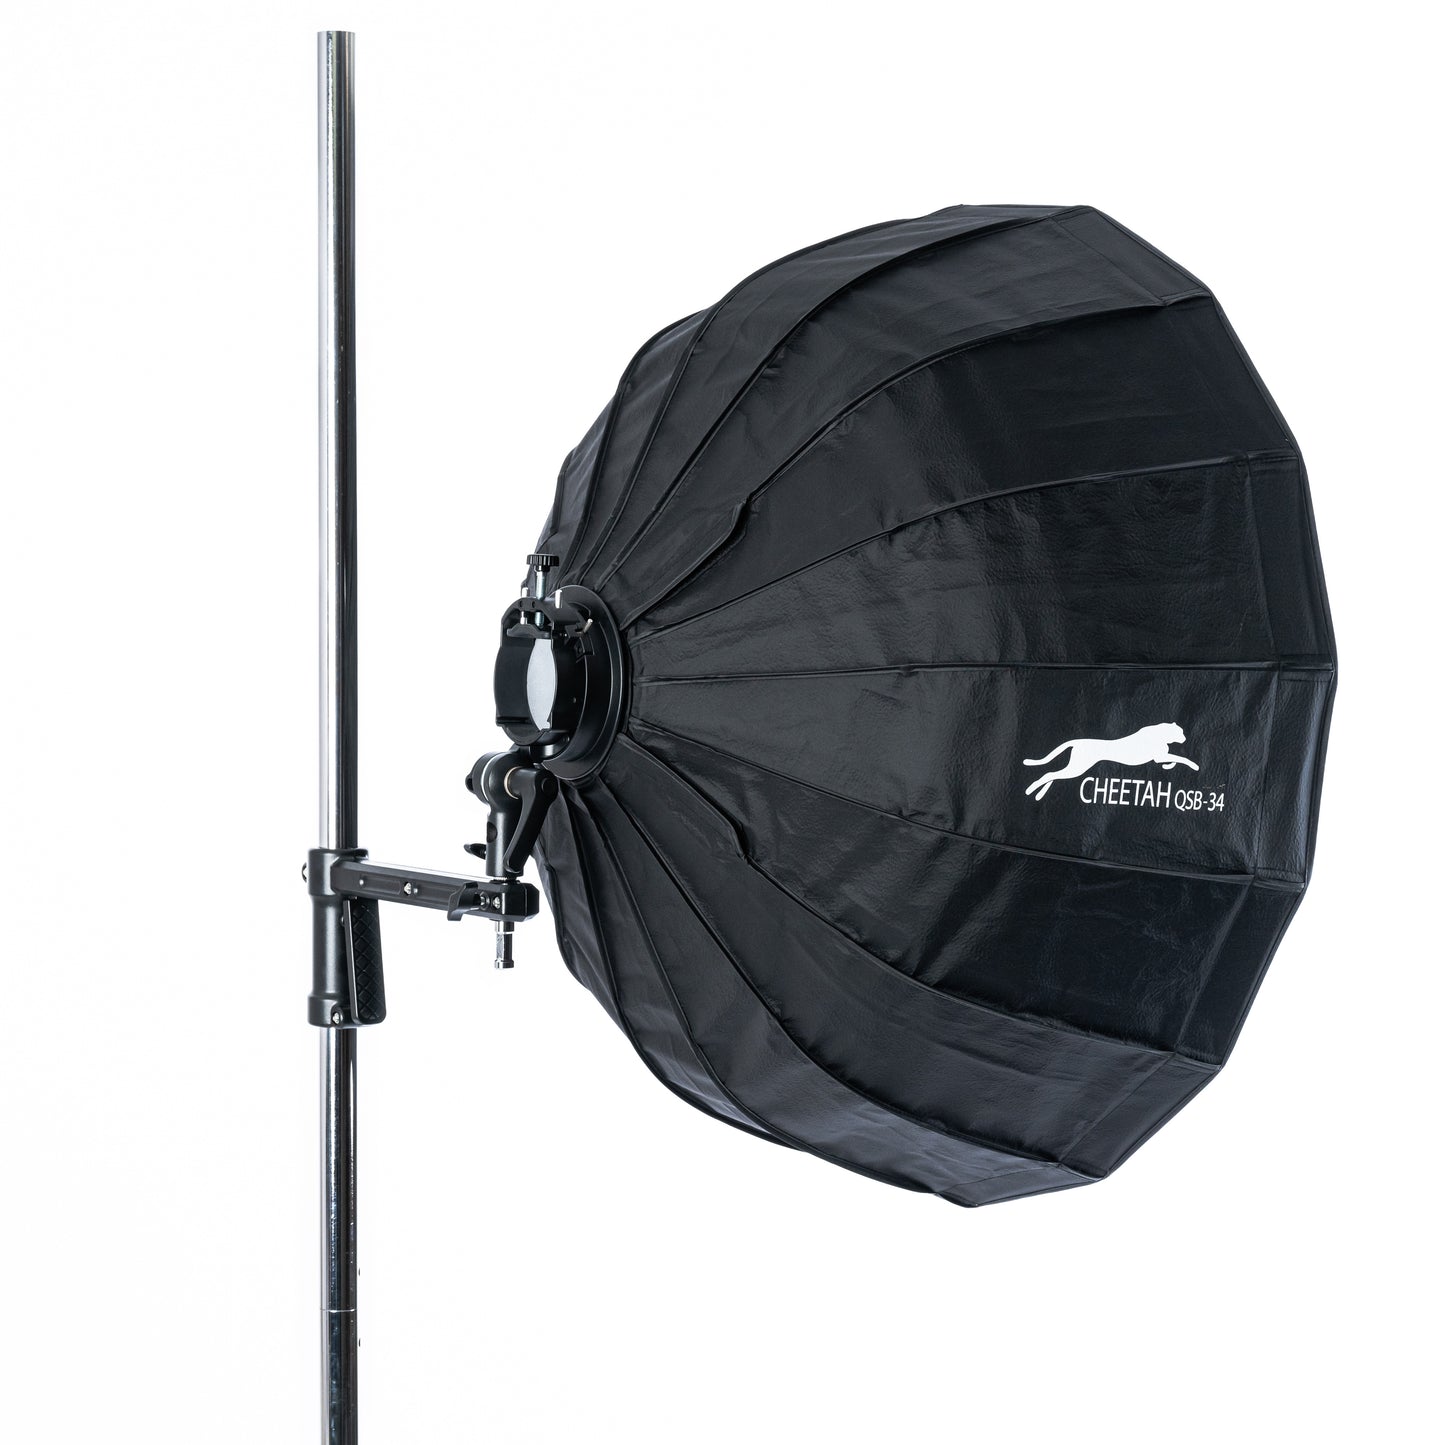 Cheetahstand Dual Pistol Grip Stand with QSB-34 Softbox Mounted